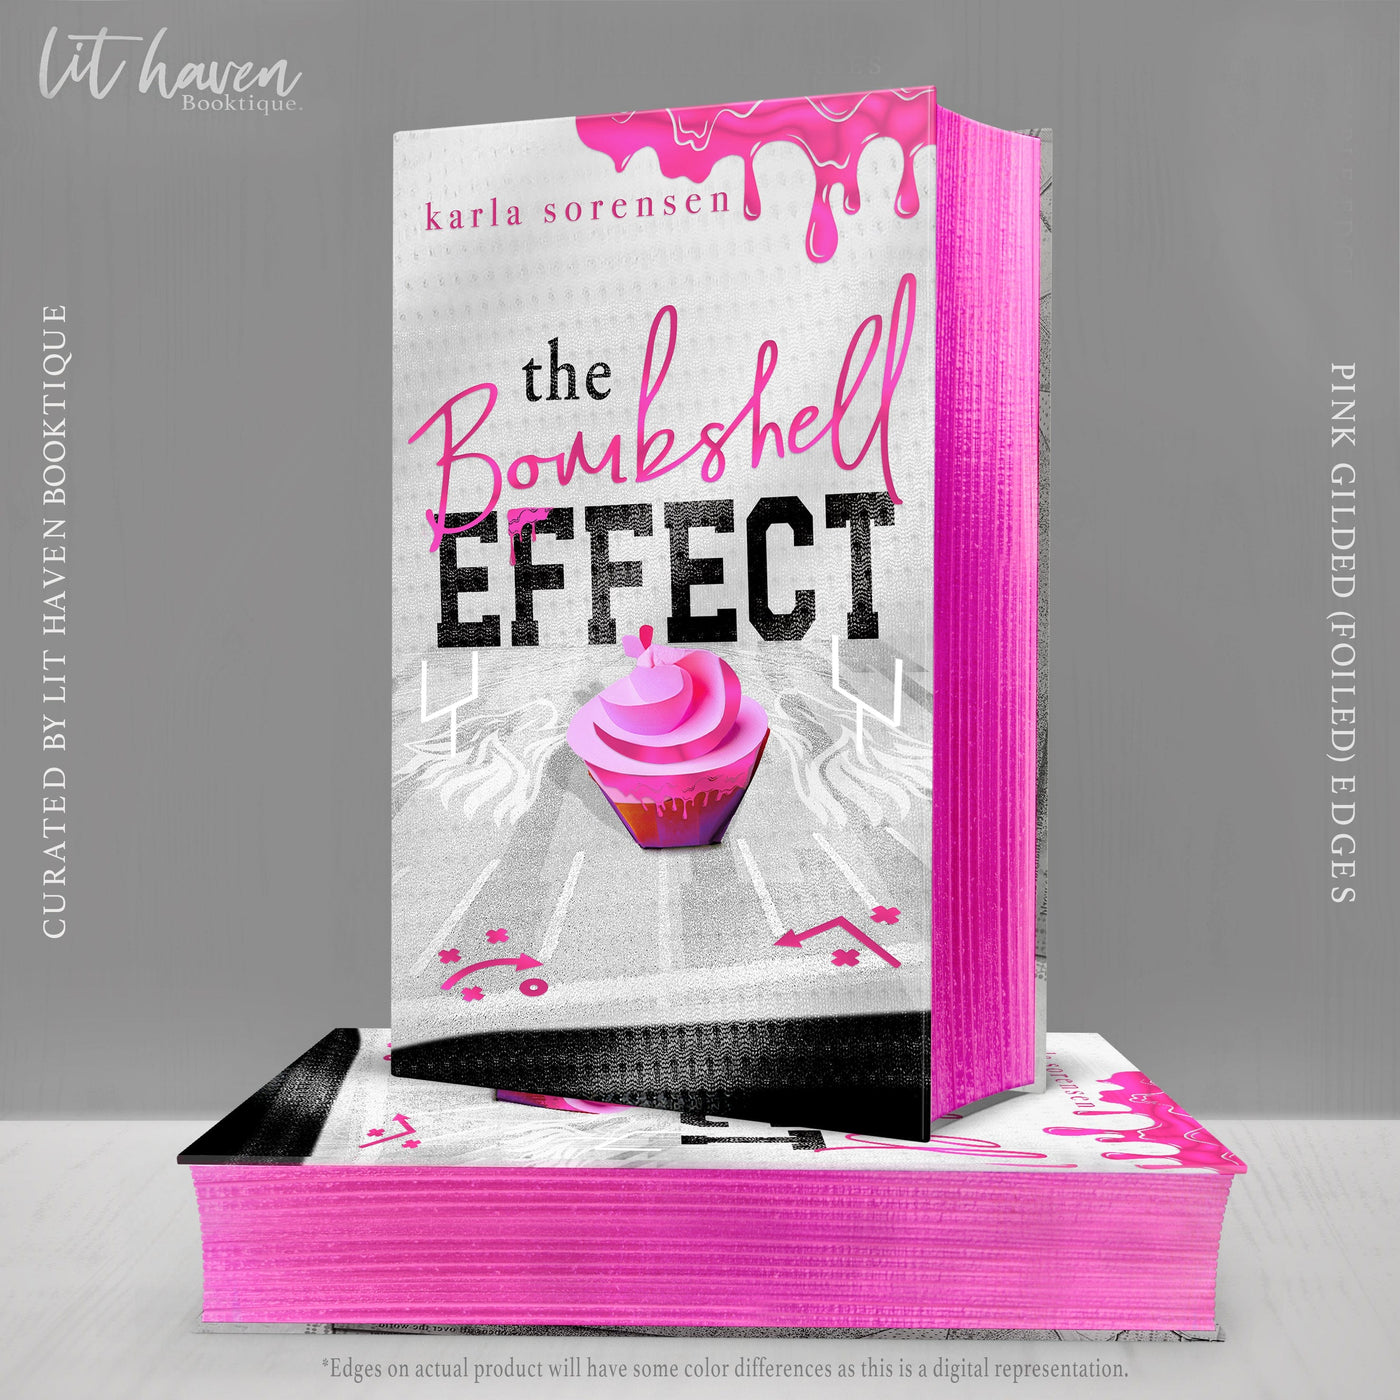 Lit Haven Booktique Book GILDED - Pink Foiled Simple Edges The Bombshell Effect hardcover Edition